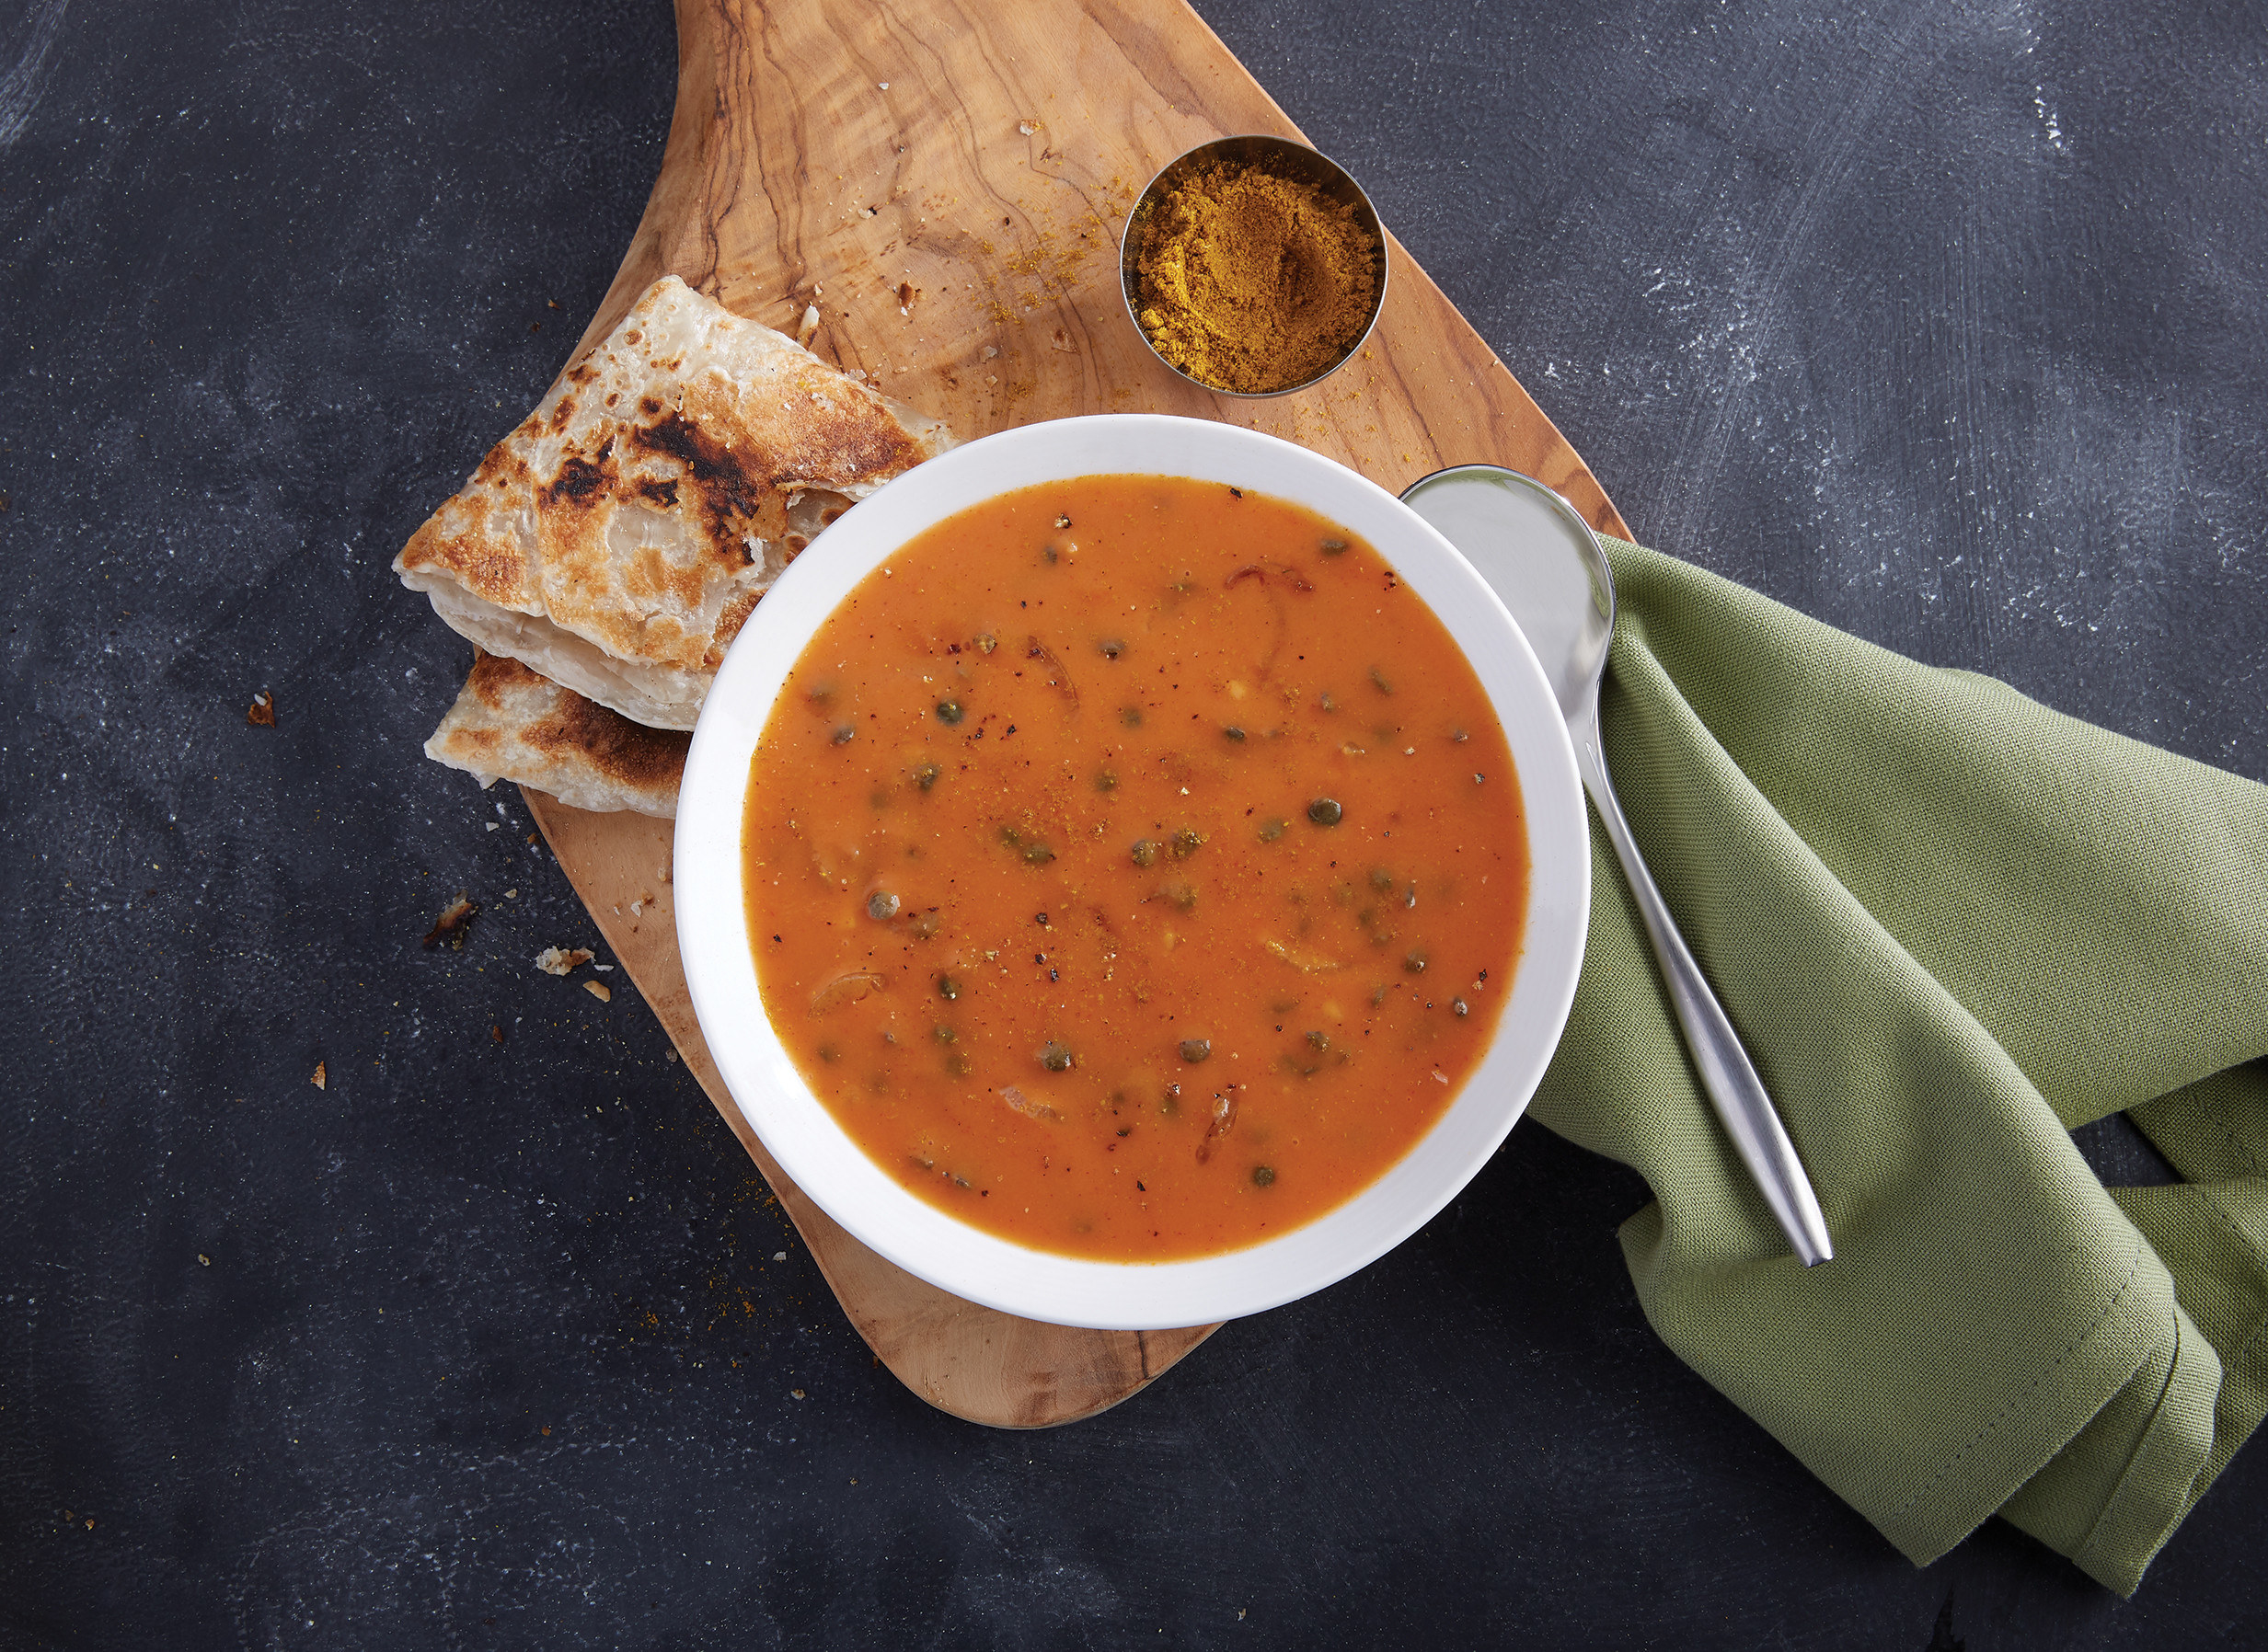 Coconut curry lentil soup with naan